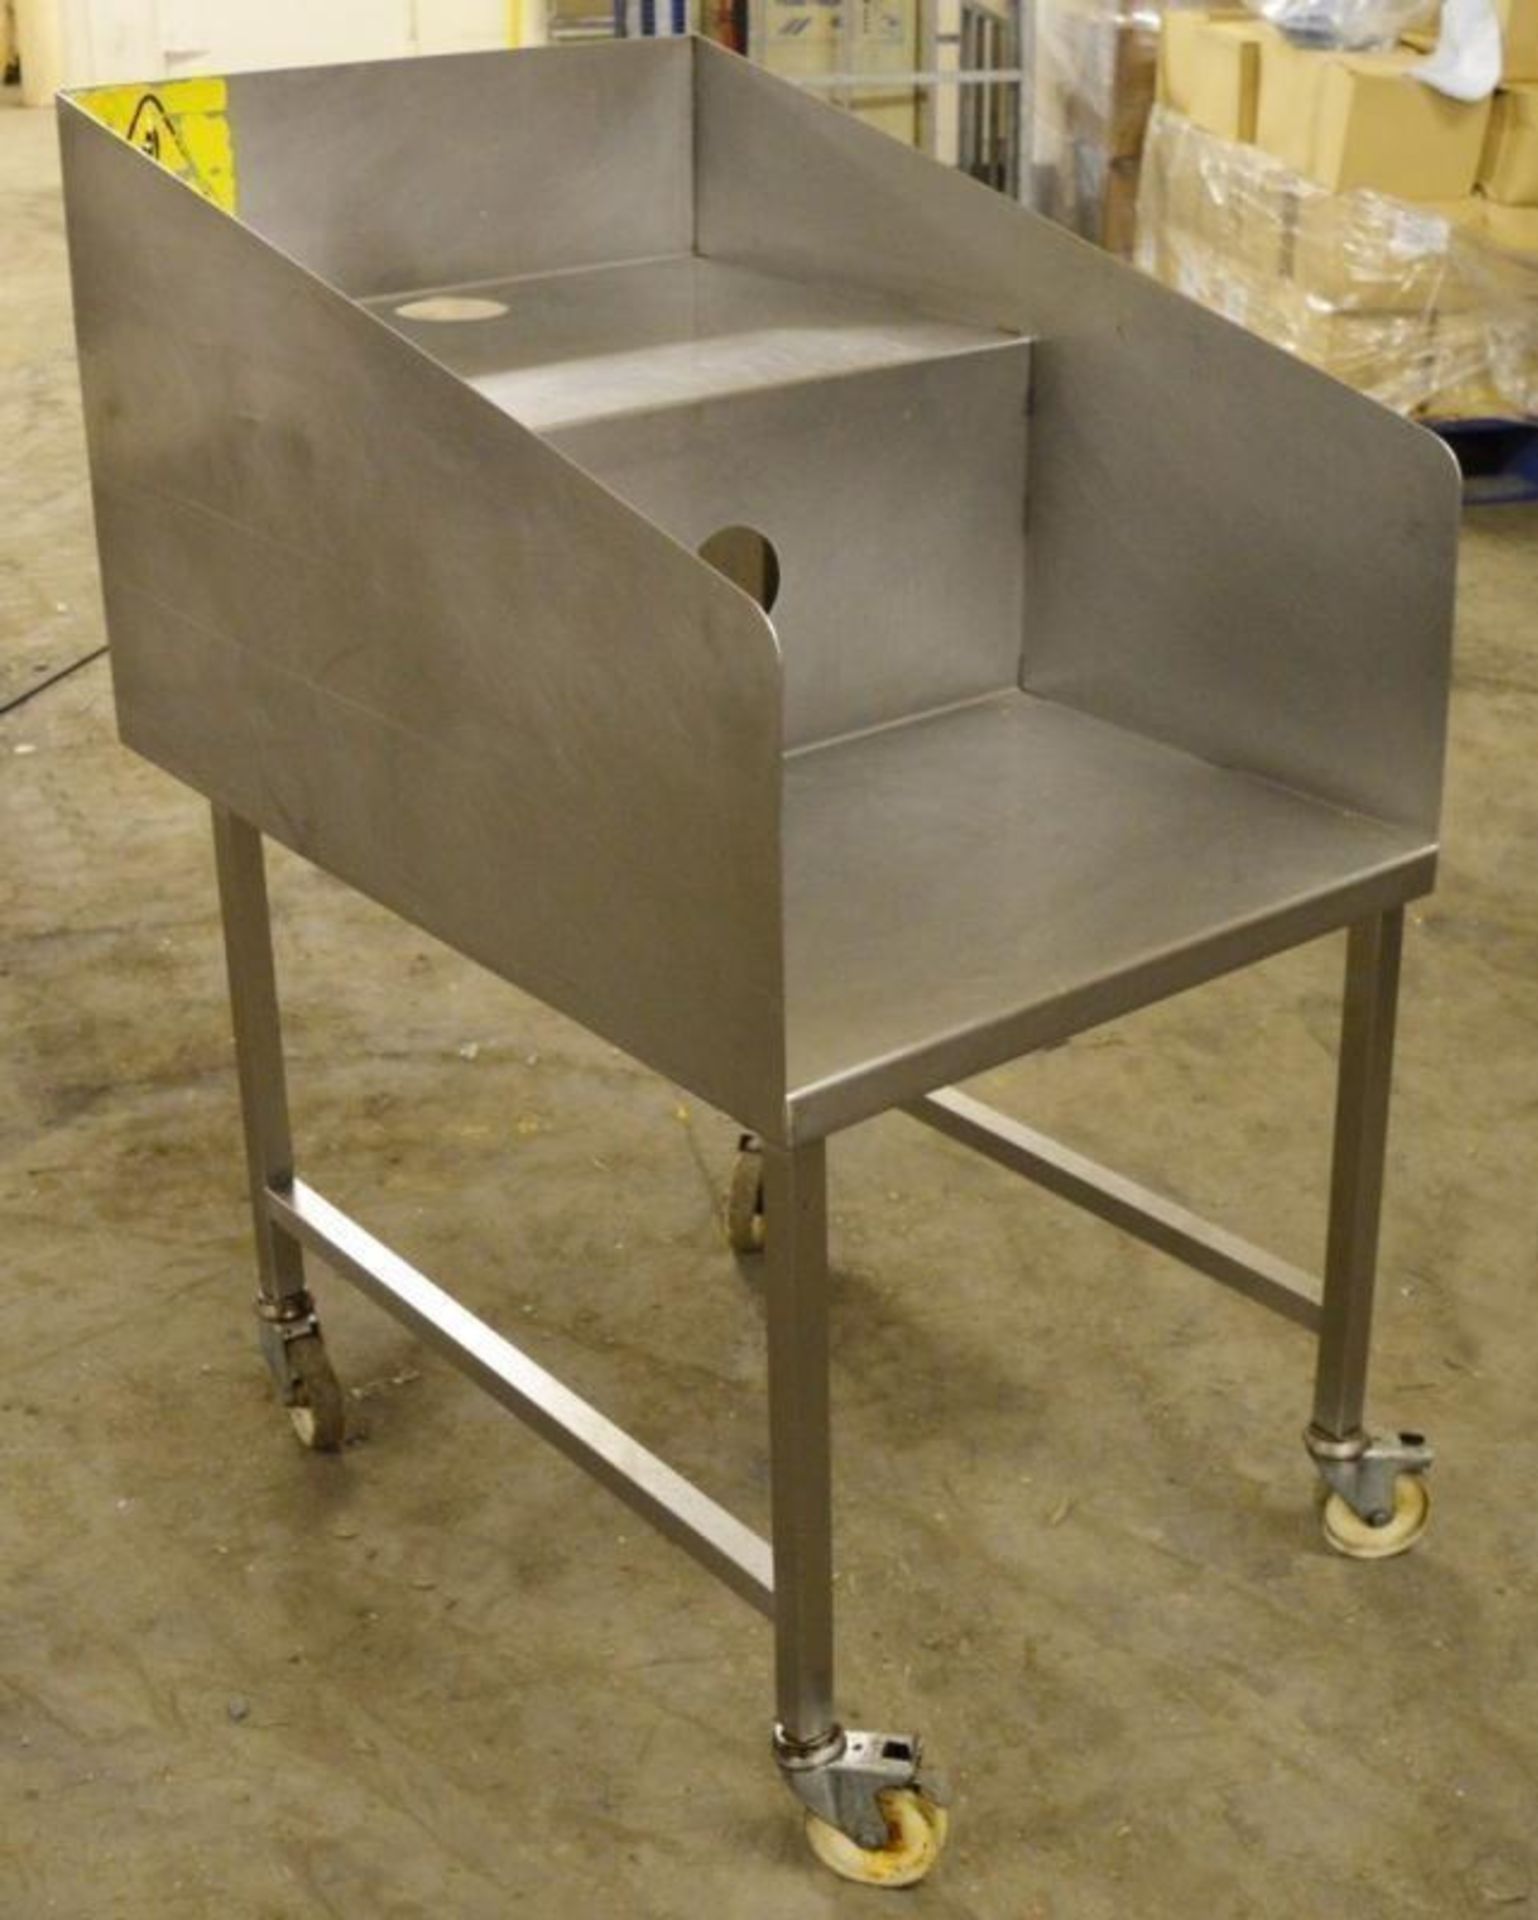 1 x Stainless Steel Commercial Waste Bench - Two Tier Waste Chute on Castors - H114 x W62.5 x D90 cm - Image 2 of 5